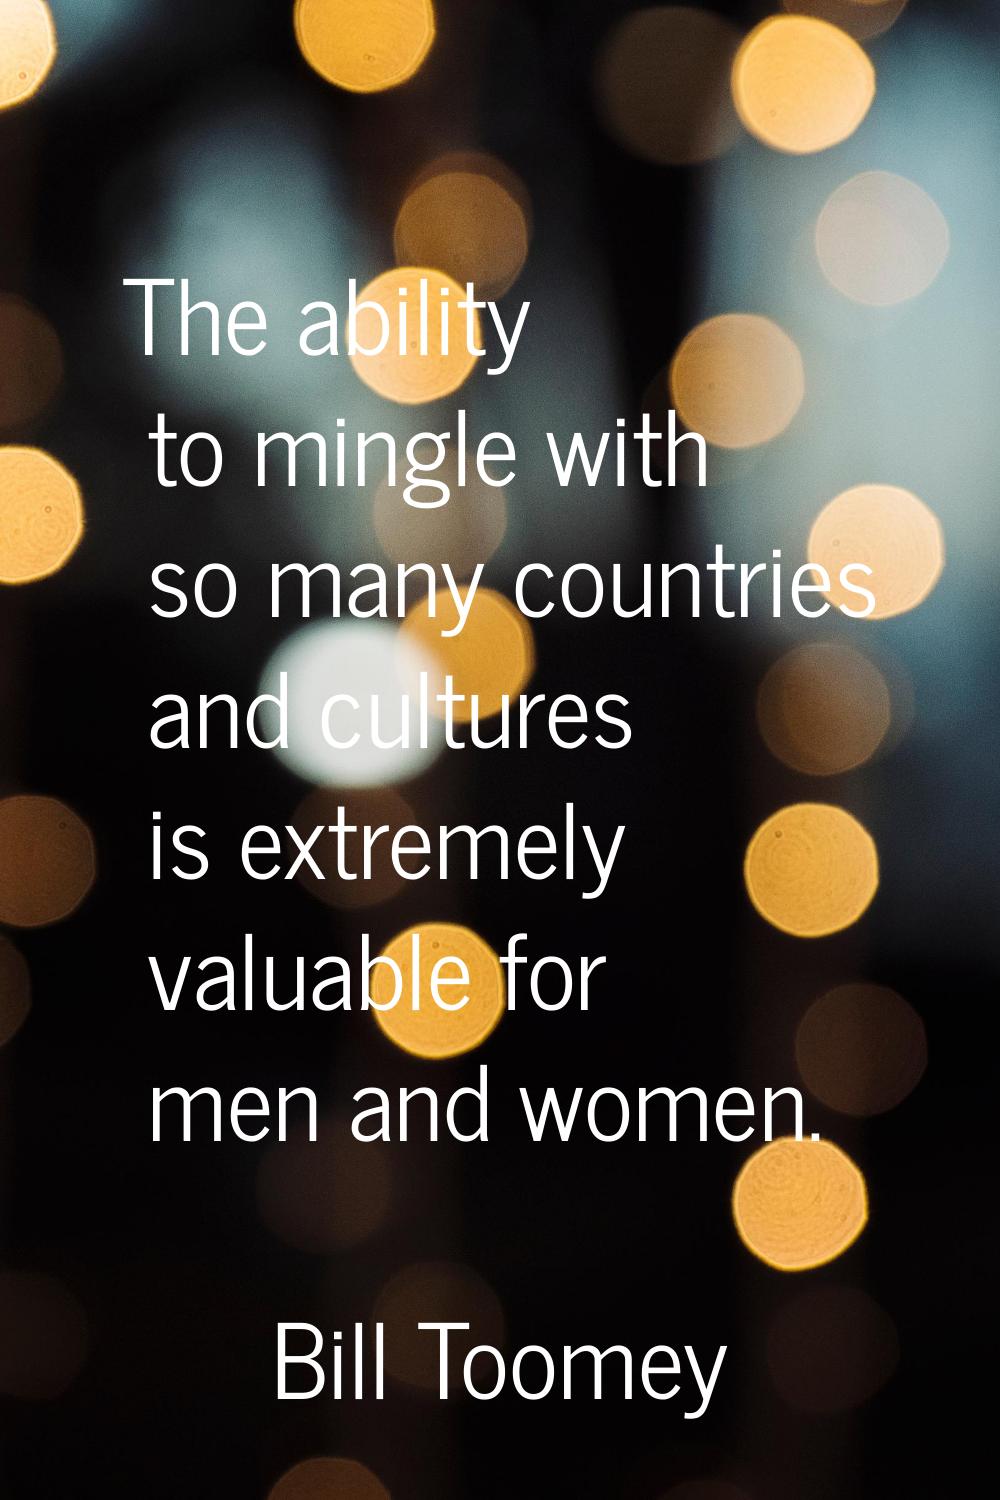 The ability to mingle with so many countries and cultures is extremely valuable for men and women.